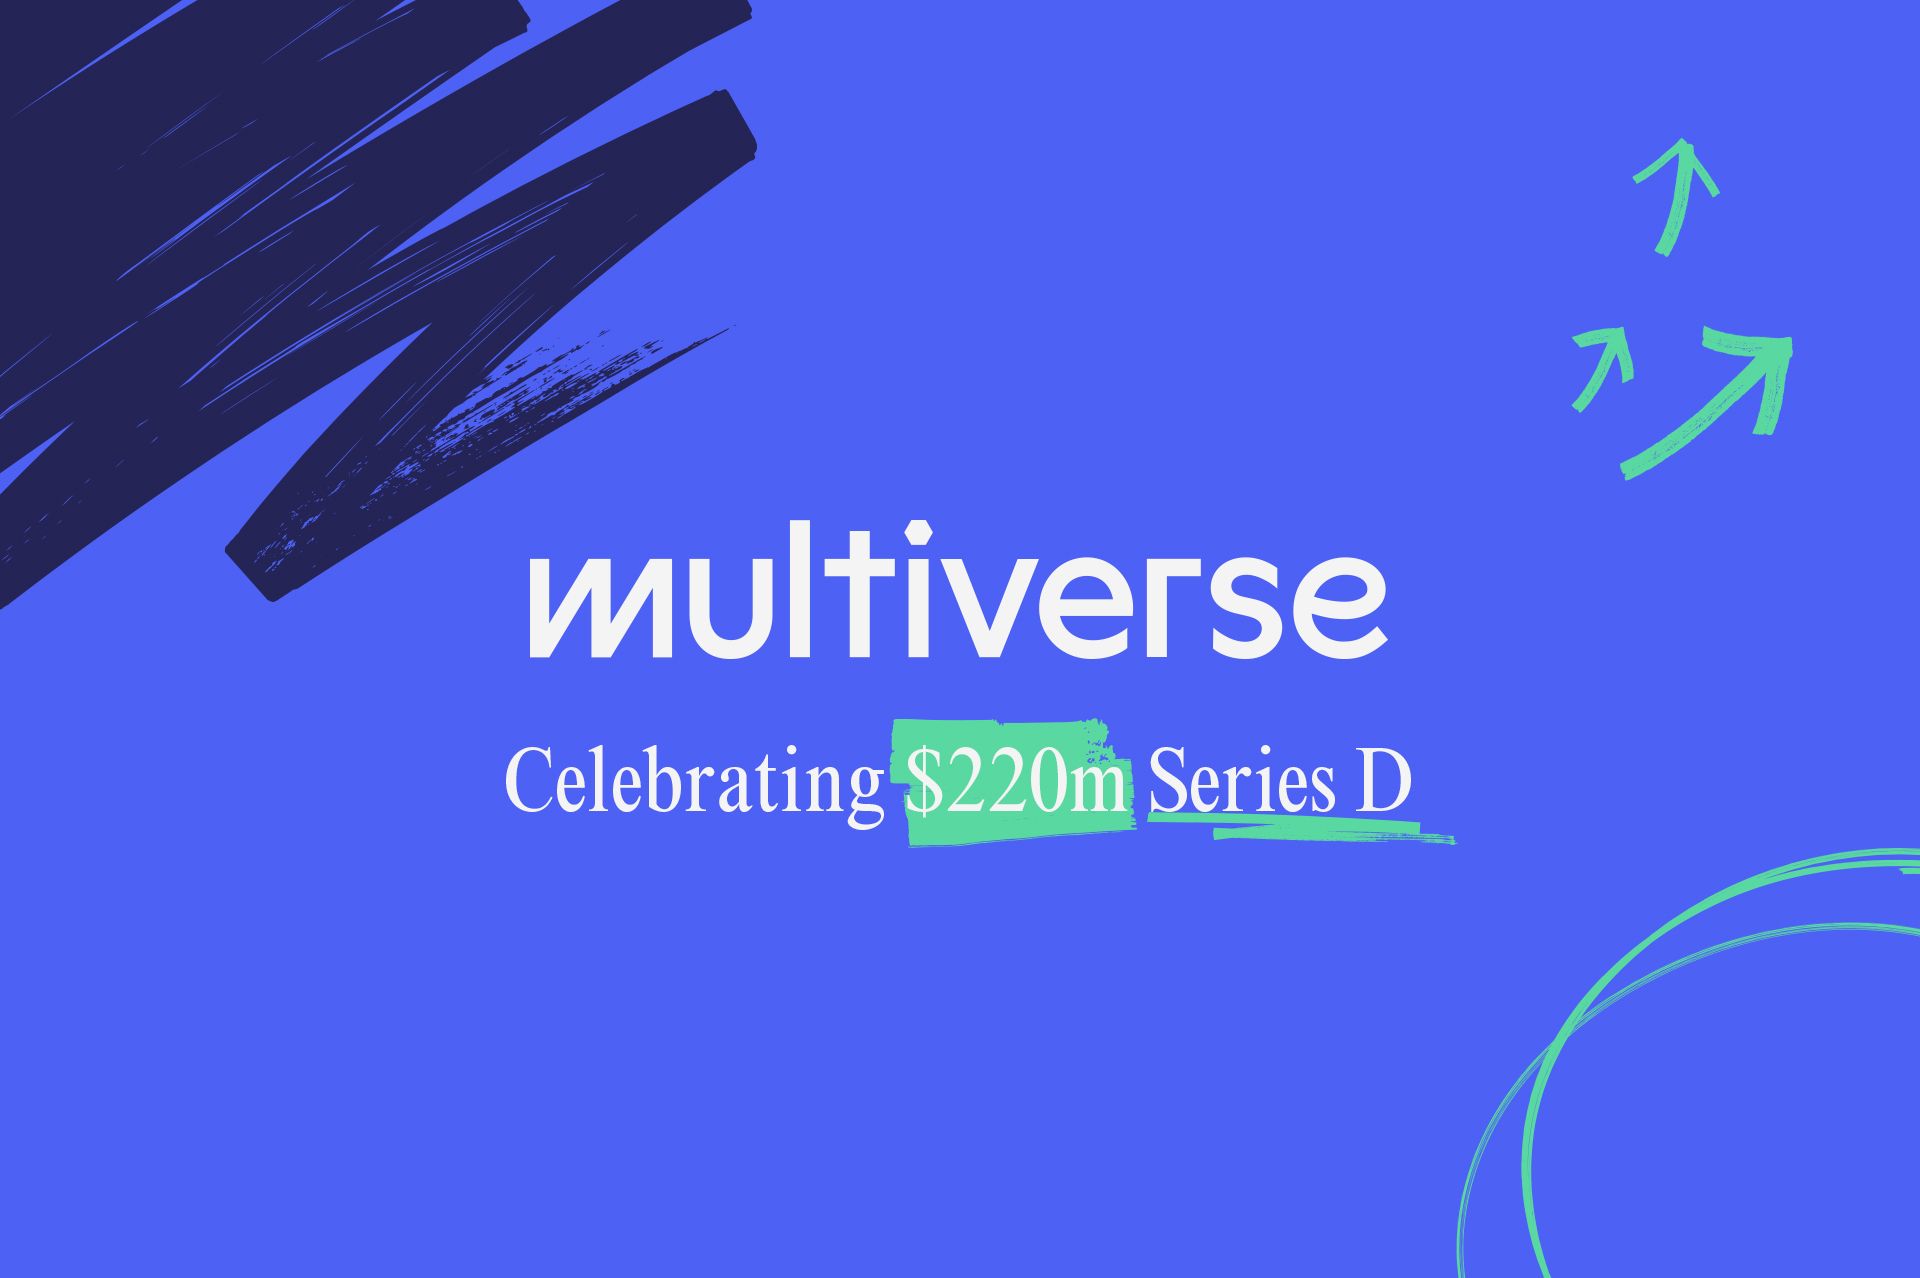 Multiverse logo with text 'Celebrating $220m Series D'